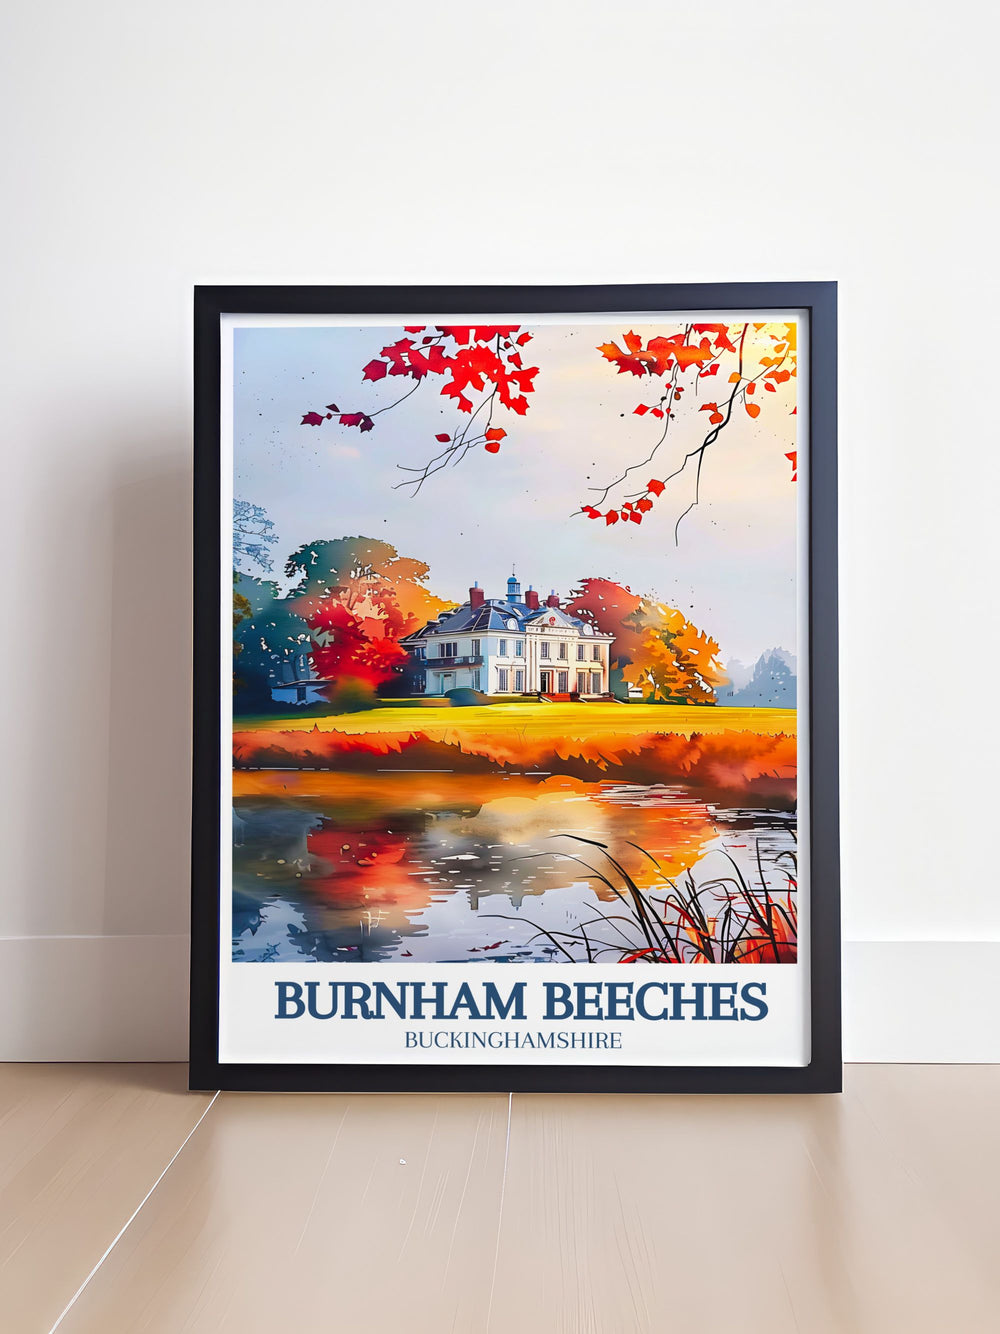 Beautifully illustrated, this vintage travel print showcases the lush landscapes of Burnham Beeches and the quaint village of Farnham Common, ideal for nature lovers and history enthusiasts.